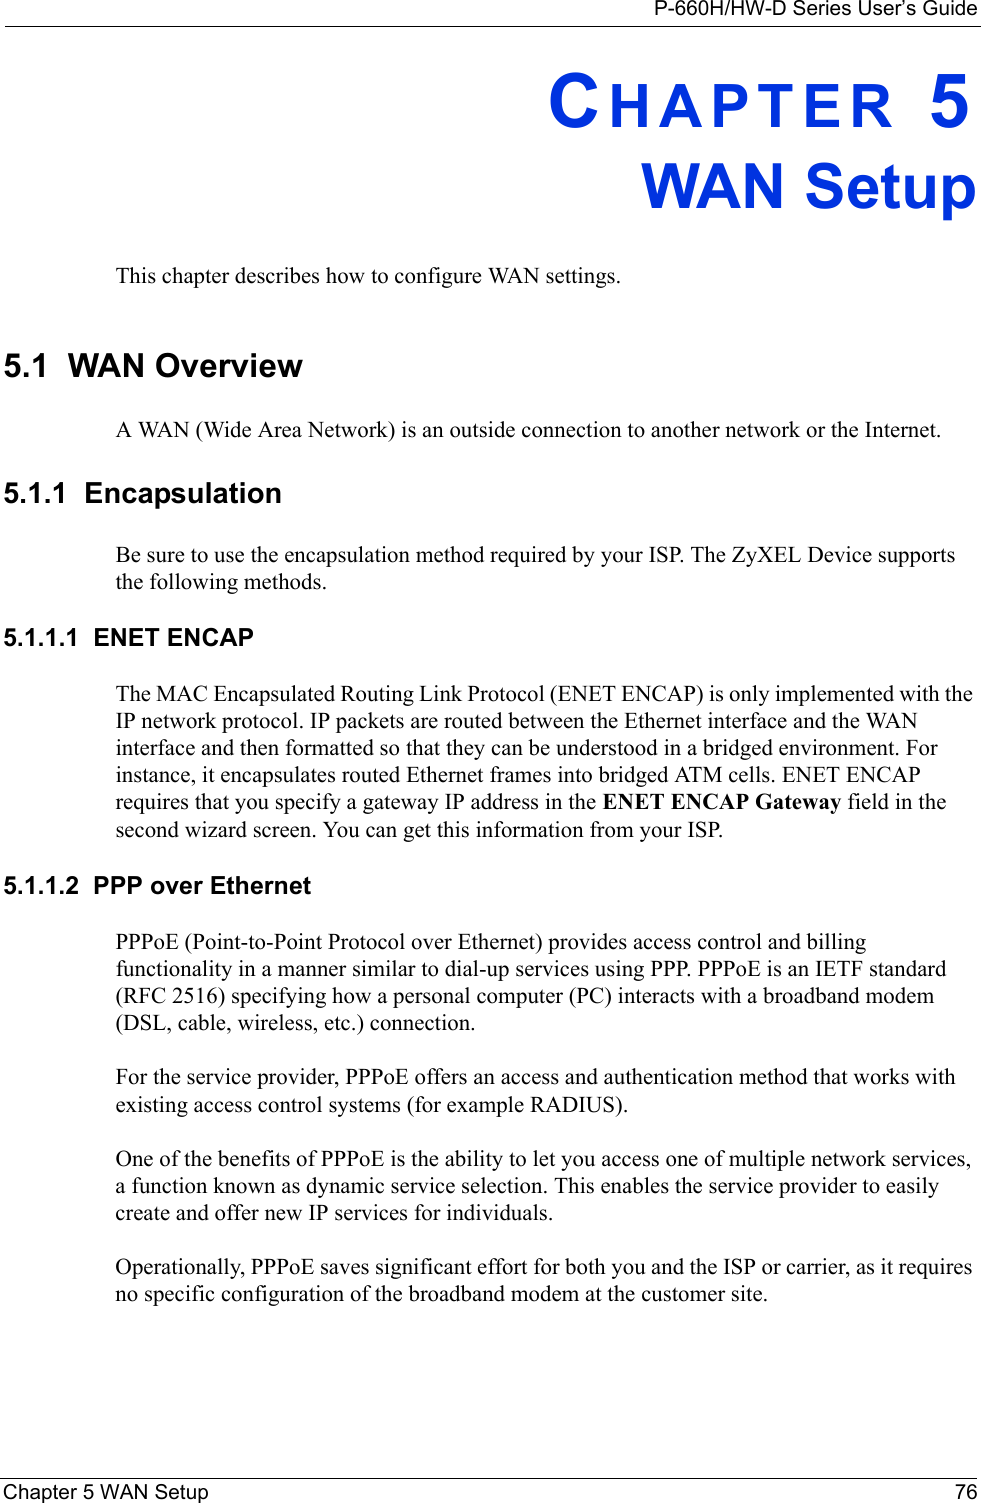 P-660H/HW-D Series User’s GuideChapter 5 WAN Setup 76CHAPTER 5WAN SetupThis chapter describes how to configure WAN settings.5.1  WAN Overview A WAN (Wide Area Network) is an outside connection to another network or the Internet.5.1.1  EncapsulationBe sure to use the encapsulation method required by your ISP. The ZyXEL Device supports the following methods.5.1.1.1  ENET ENCAPThe MAC Encapsulated Routing Link Protocol (ENET ENCAP) is only implemented with the IP network protocol. IP packets are routed between the Ethernet interface and the WAN interface and then formatted so that they can be understood in a bridged environment. For instance, it encapsulates routed Ethernet frames into bridged ATM cells. ENET ENCAP requires that you specify a gateway IP address in the ENET ENCAP Gateway field in the second wizard screen. You can get this information from your ISP.5.1.1.2  PPP over EthernetPPPoE (Point-to-Point Protocol over Ethernet) provides access control and billing functionality in a manner similar to dial-up services using PPP. PPPoE is an IETF standard (RFC 2516) specifying how a personal computer (PC) interacts with a broadband modem (DSL, cable, wireless, etc.) connection. For the service provider, PPPoE offers an access and authentication method that works with existing access control systems (for example RADIUS).One of the benefits of PPPoE is the ability to let you access one of multiple network services, a function known as dynamic service selection. This enables the service provider to easily create and offer new IP services for individuals.Operationally, PPPoE saves significant effort for both you and the ISP or carrier, as it requires no specific configuration of the broadband modem at the customer site.